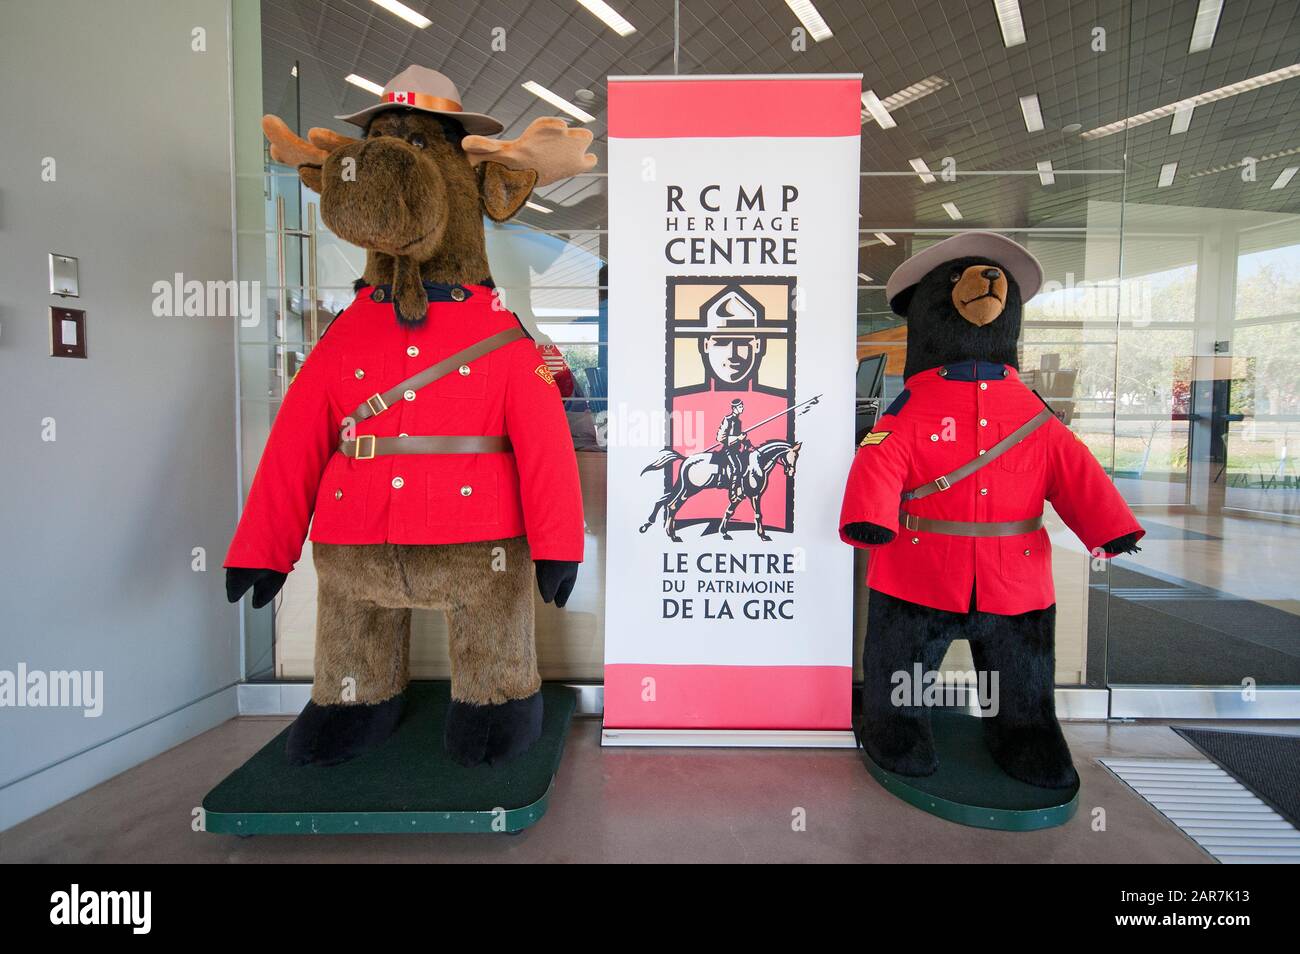 Moose and bear stuffed and dressed as Canadian Mountie, Royal Canadian Mounted Police (RCMP) Heritage Centre, Regina, Saskatchewan, Canada Stock Photo